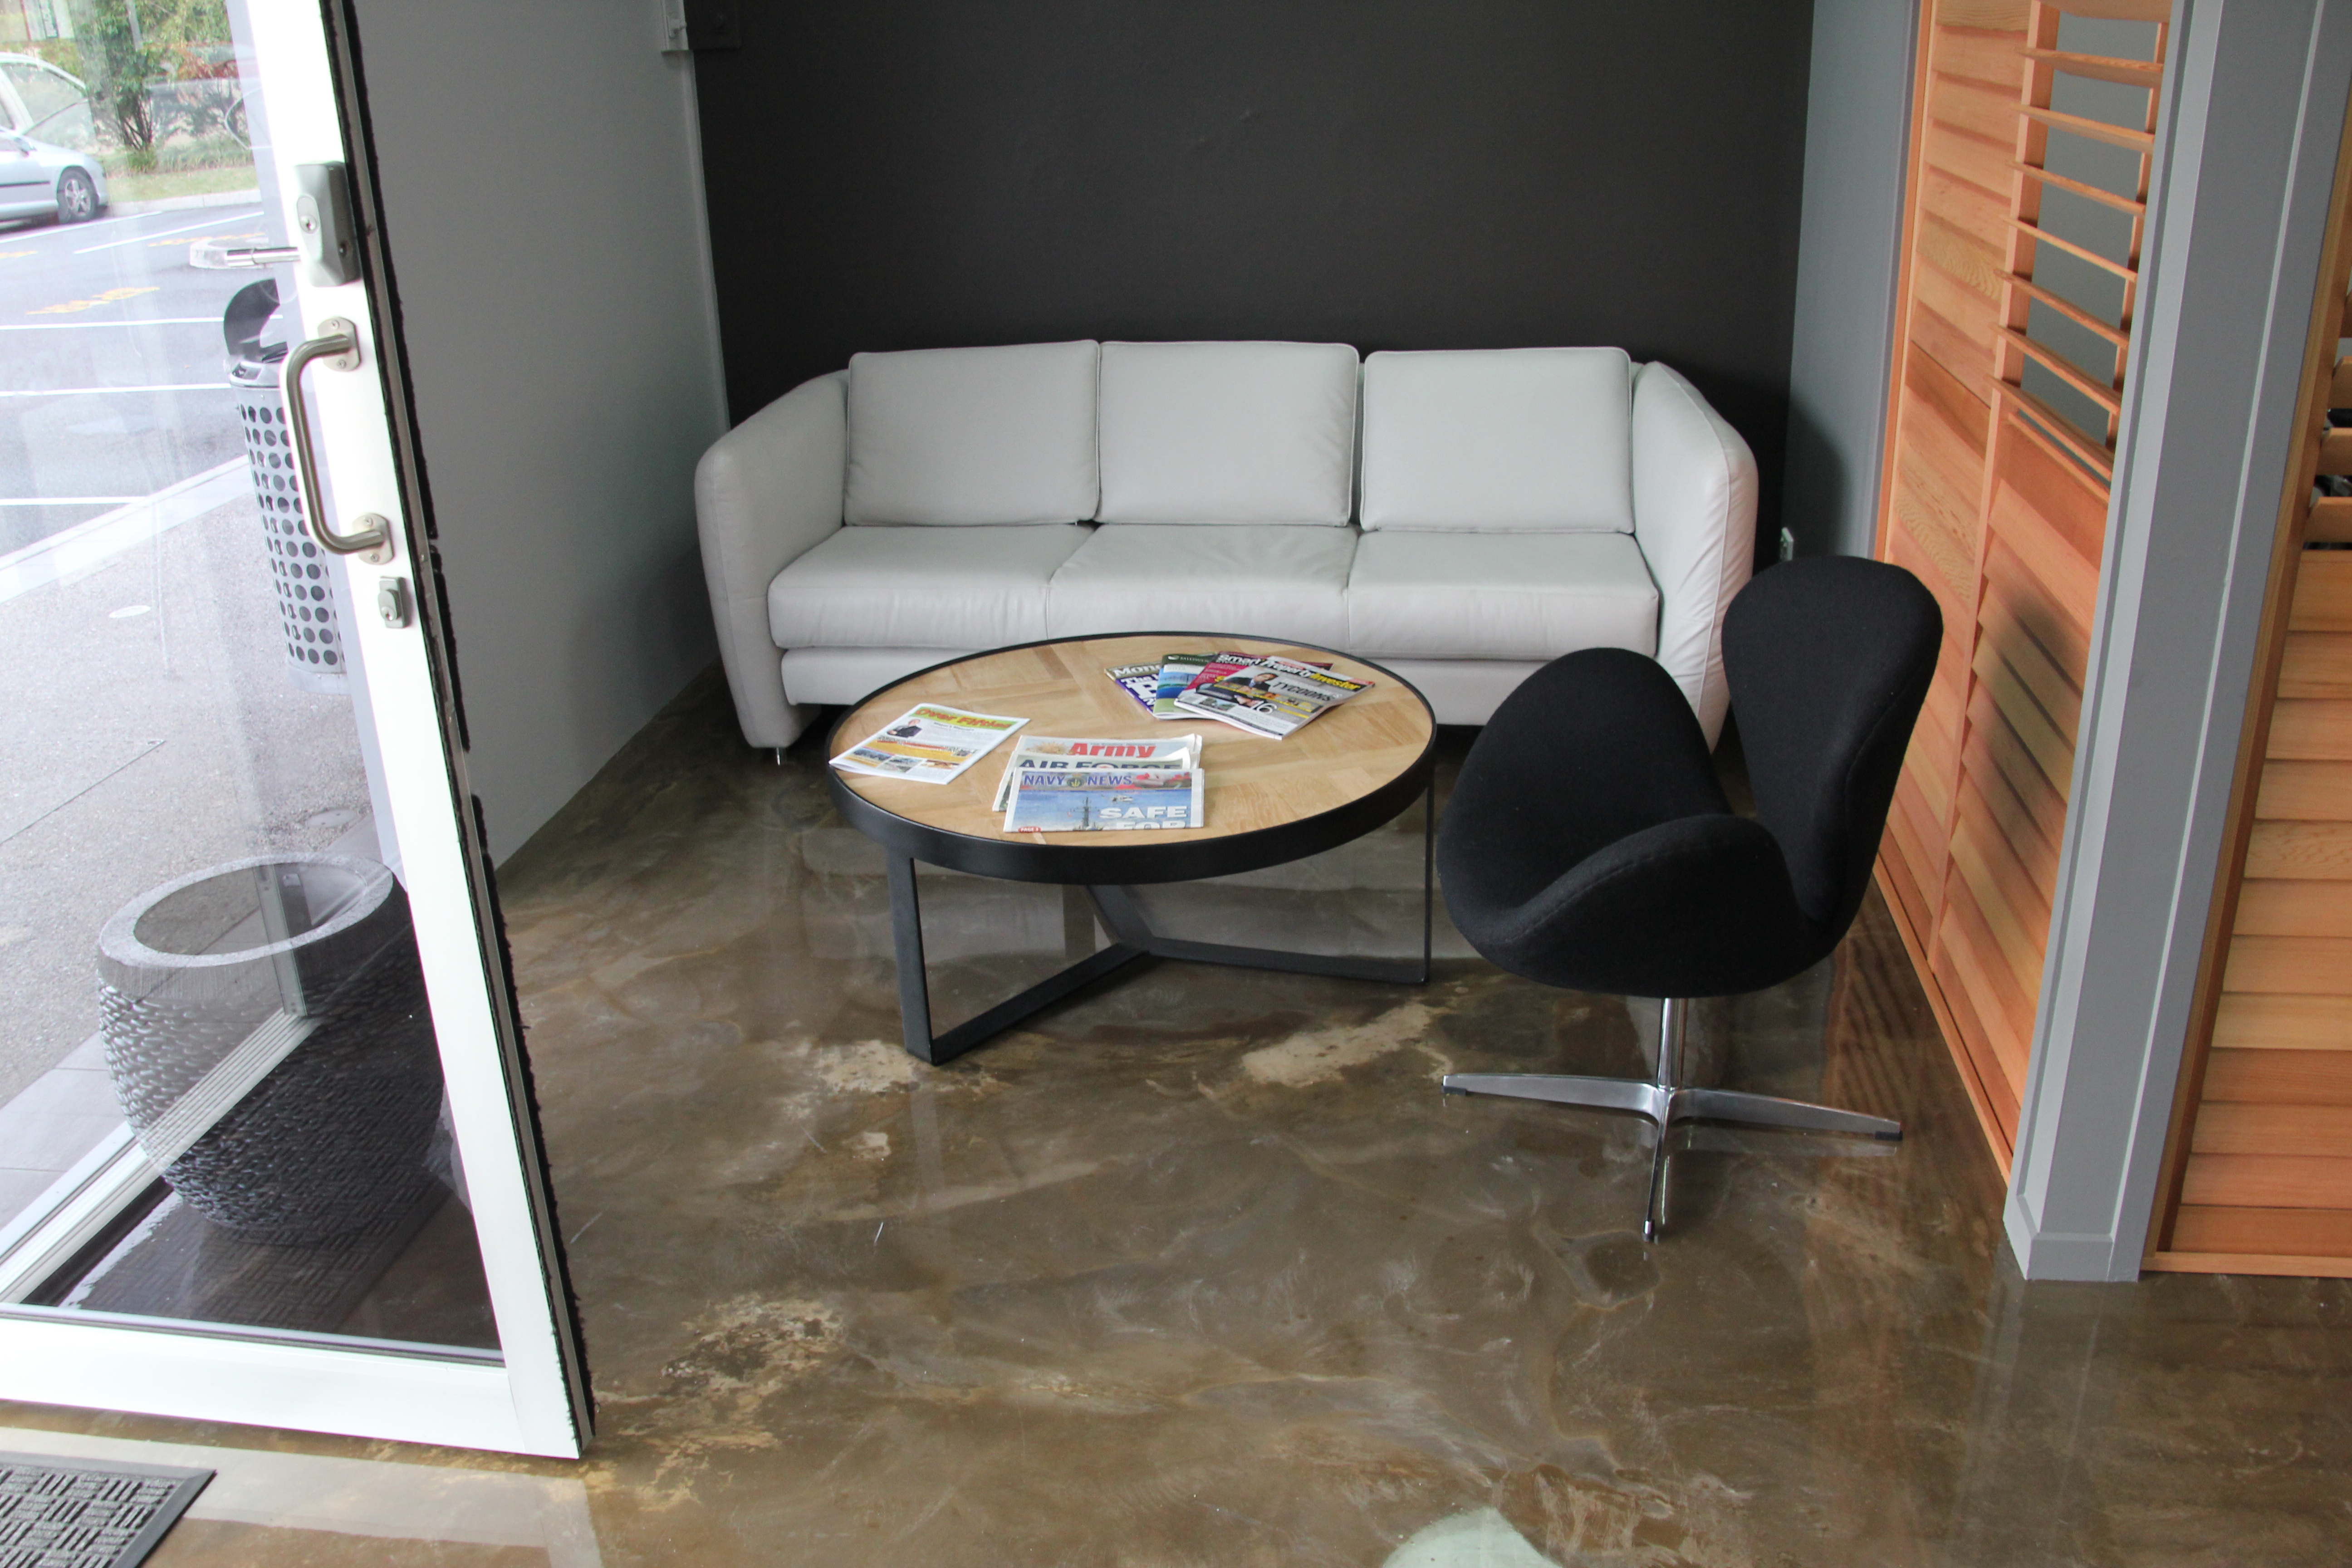 A high-gloss, stone-like decorative epoxy floor in the waiting room of the real estate office.